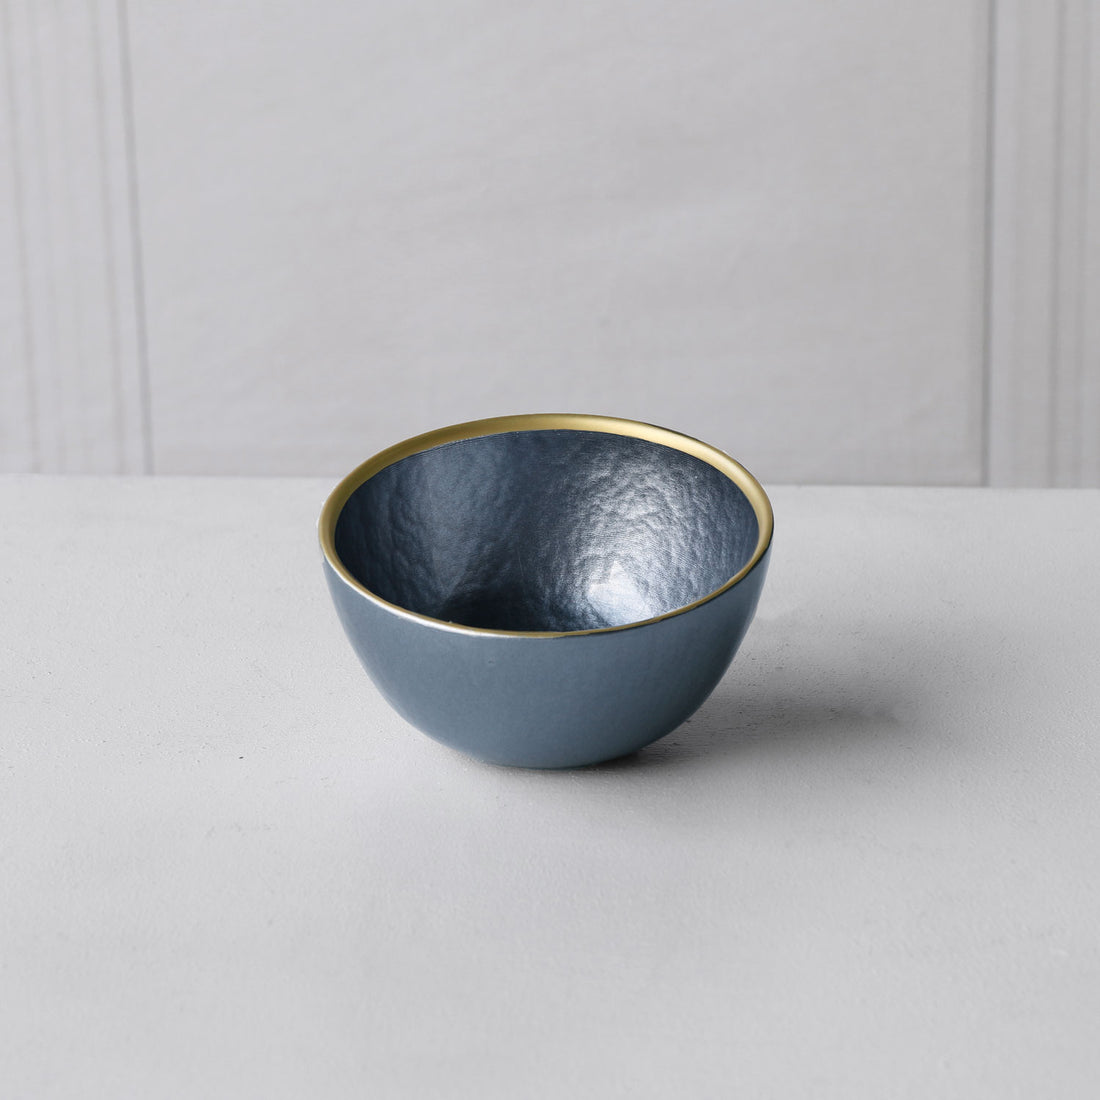 GLASS Blue Opalescent Small Bowl with Gold Rim (Blue and Gold)